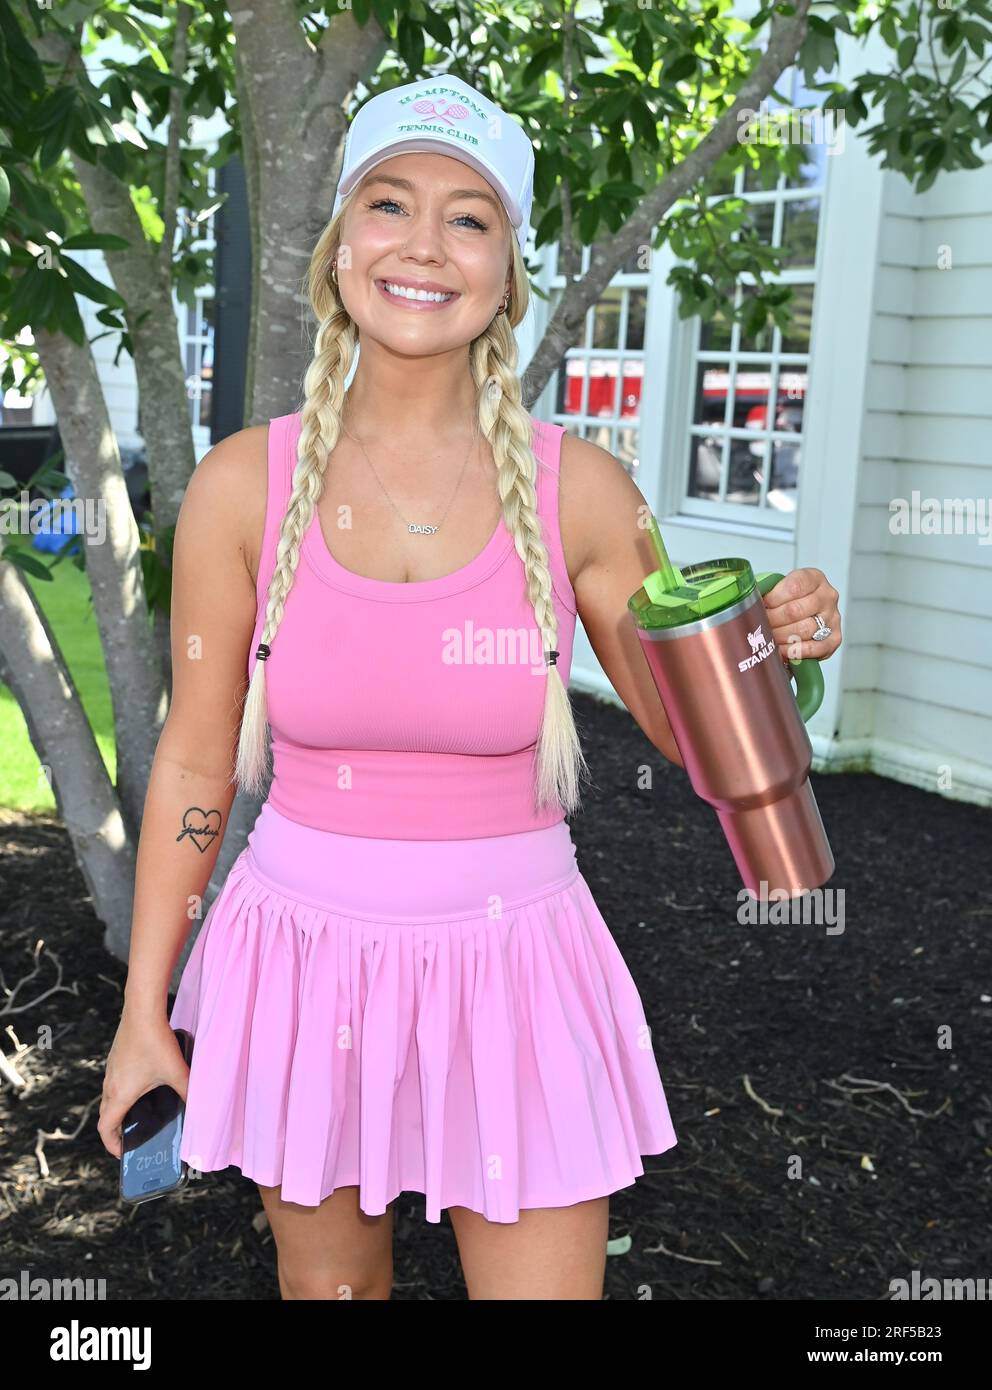 https://c8.alamy.com/comp/2RF5B23/franklin-usa-31st-july-2023-raelynn-with-her-lainey-wilson-stanley-tumbler-at-the-folds-of-honor-tennessee-3rd-annual-celebrity-golf-tournament-held-at-the-governors-club-on-july-31-2023-in-franklin-tn-tammie-arroyoaff-usacom-credit-affalamy-live-news-2RF5B23.jpg